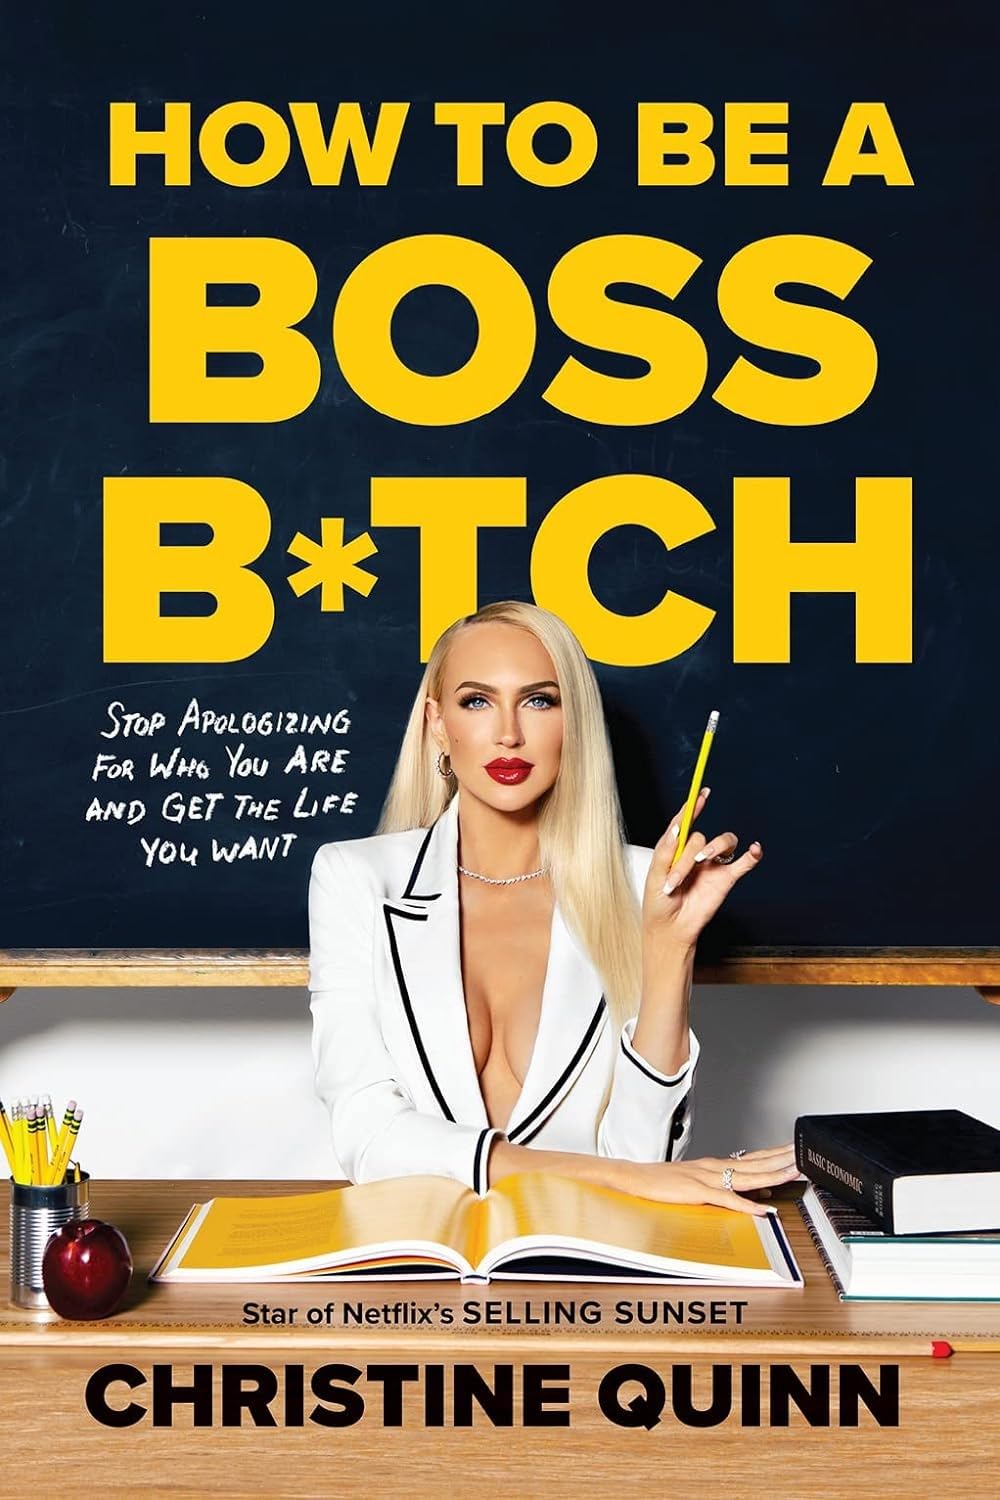 How to Be a Boss B*tch: Never Apologize, Build Your Brand, and Succeed on Your Terms - Christine Quinn (Bargain)